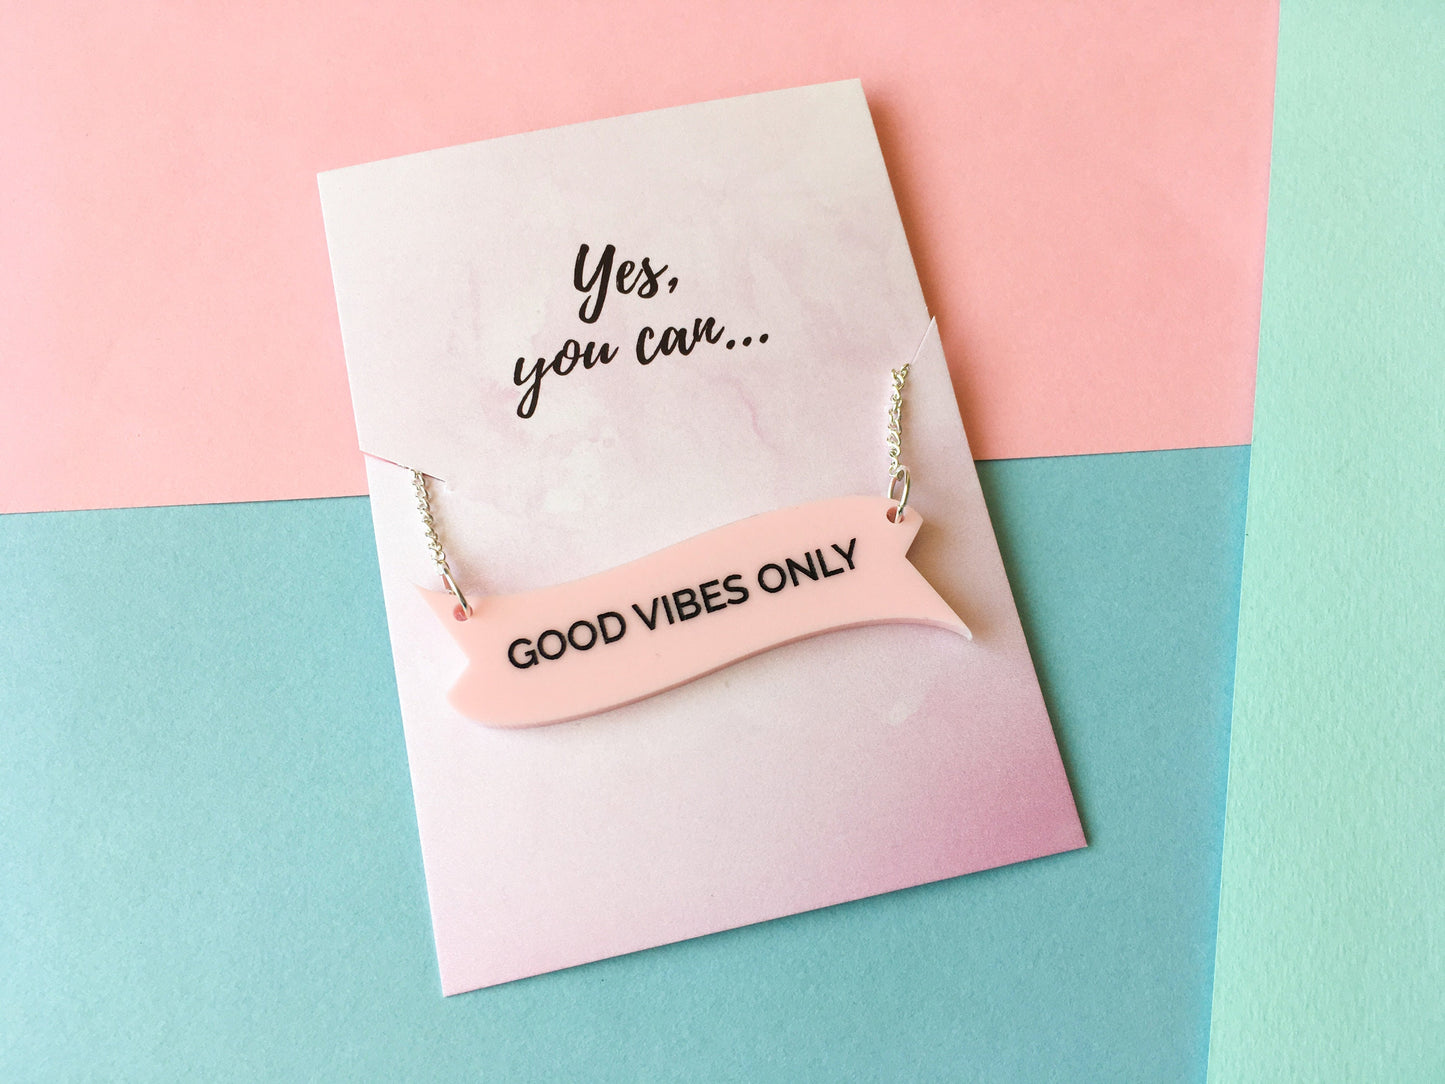 Good Vibes Only Slogan Necklace